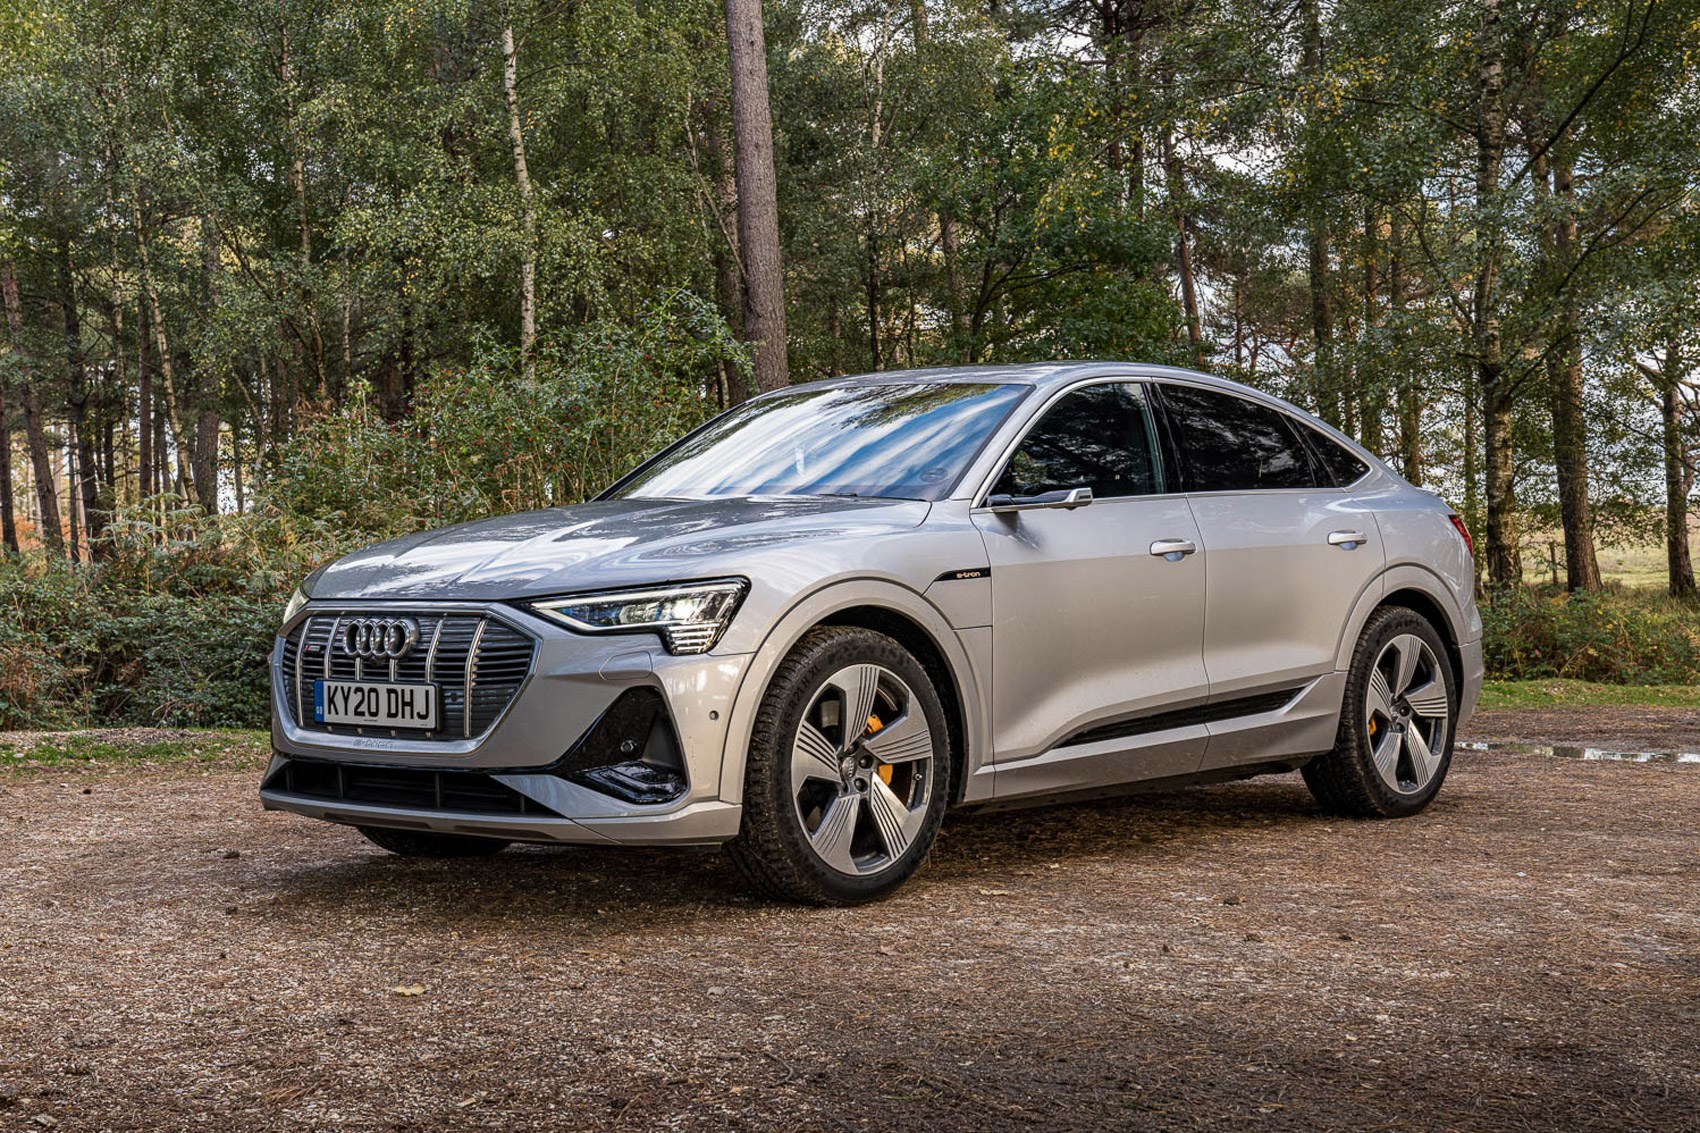 Electric, efficient and emotionally appealing: Audi Q4 e-tron and Q4  Sportback e-tron